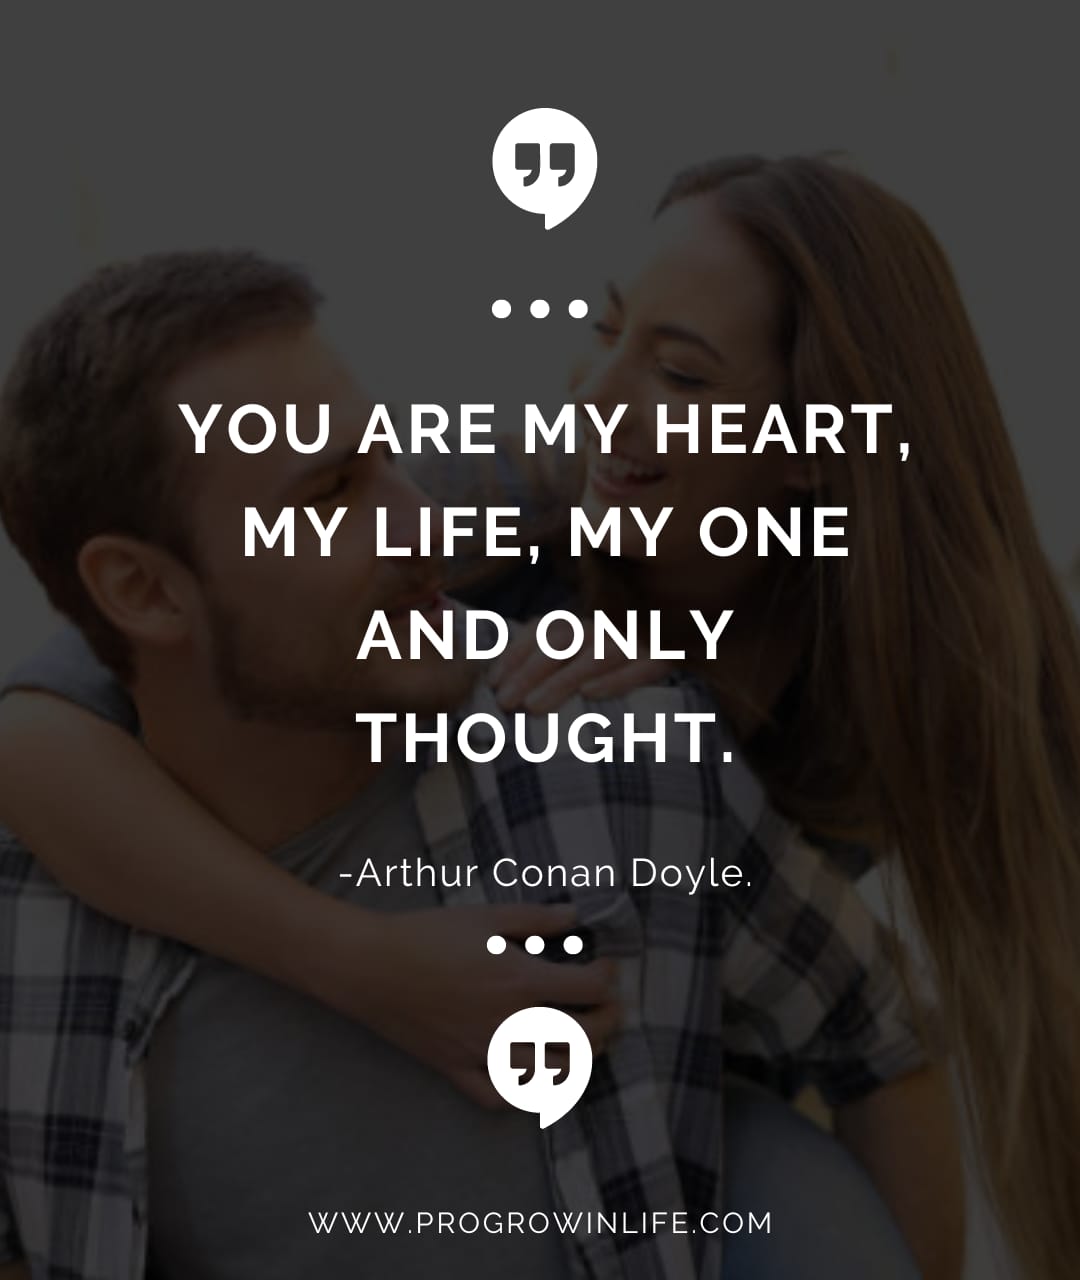 Funny love quotes for him from the heart.